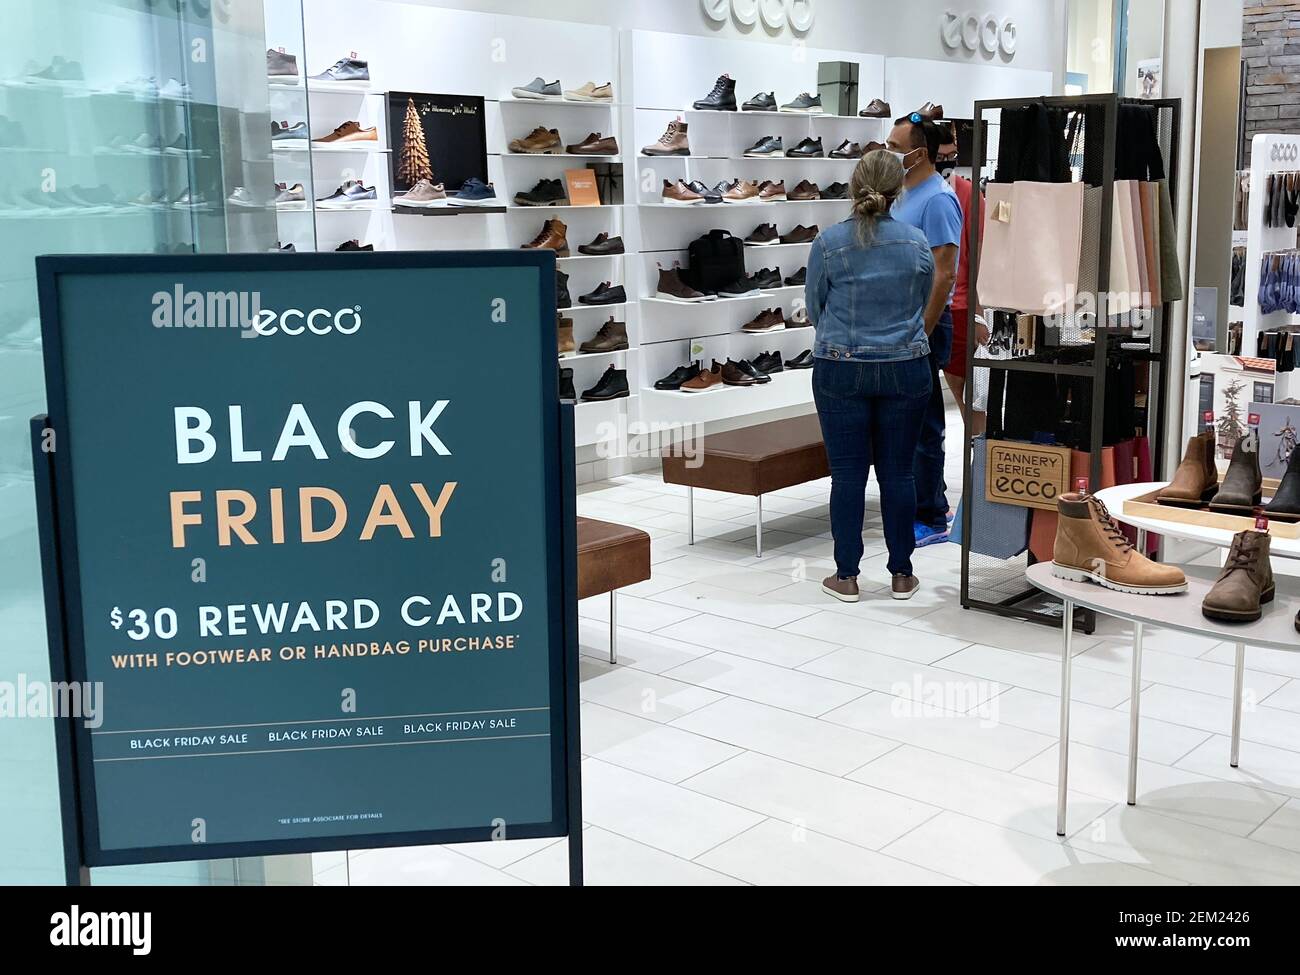 Shoppers are seen a store with a Black Friday sale sign at The Mall at Millenia as prepare for one the busiest shopping days of the year. Many